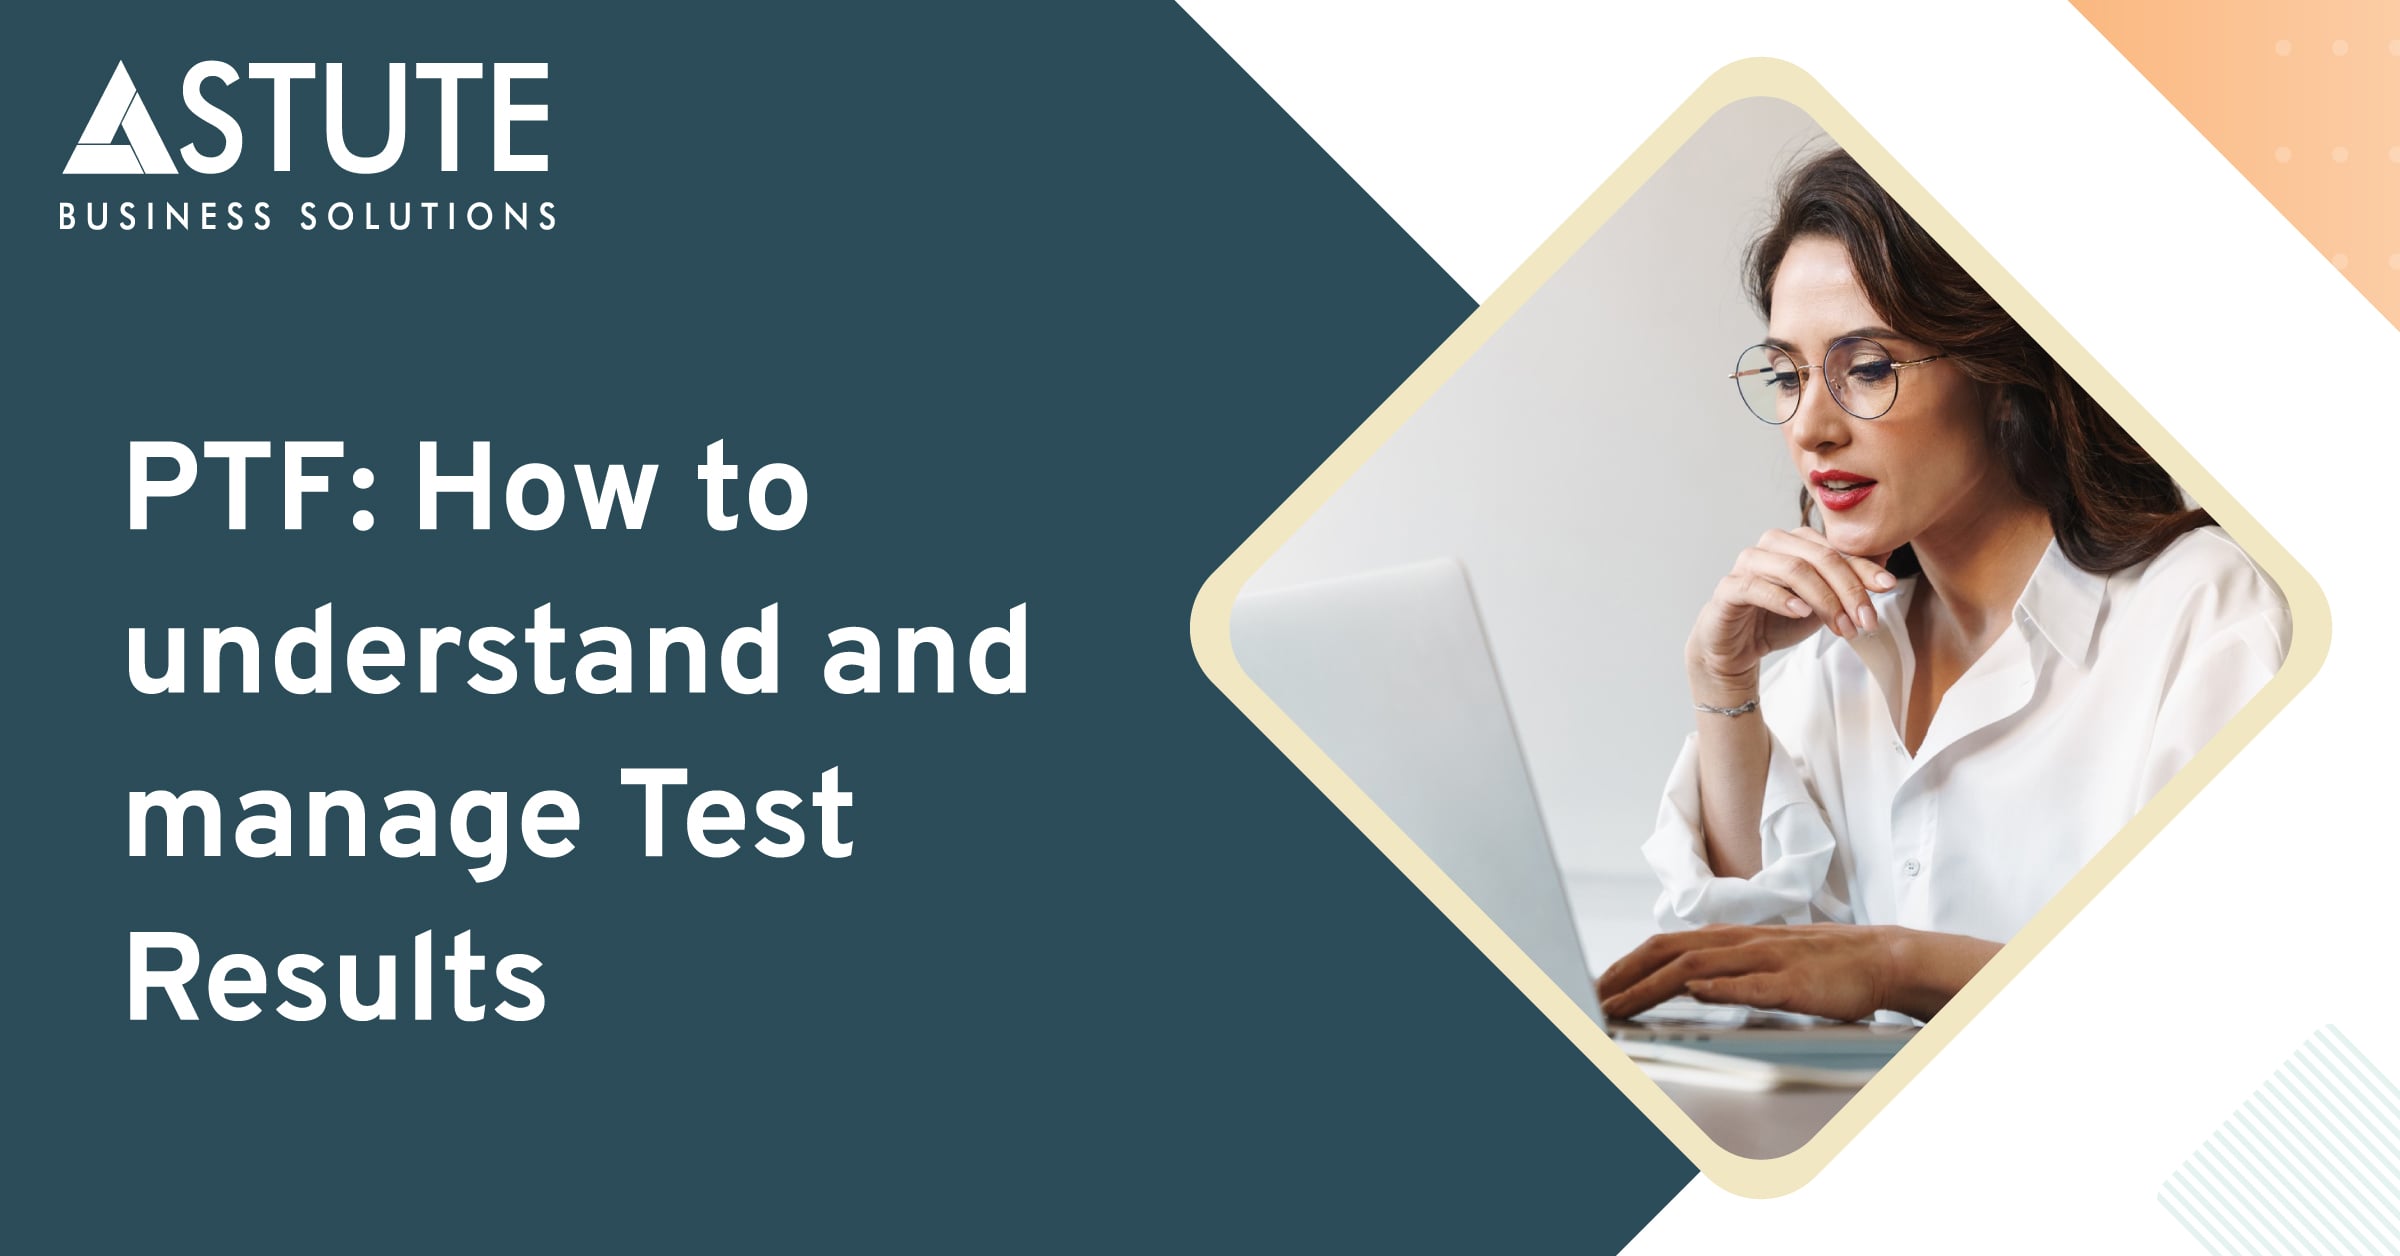 PTF: How to understand and manage Test Results